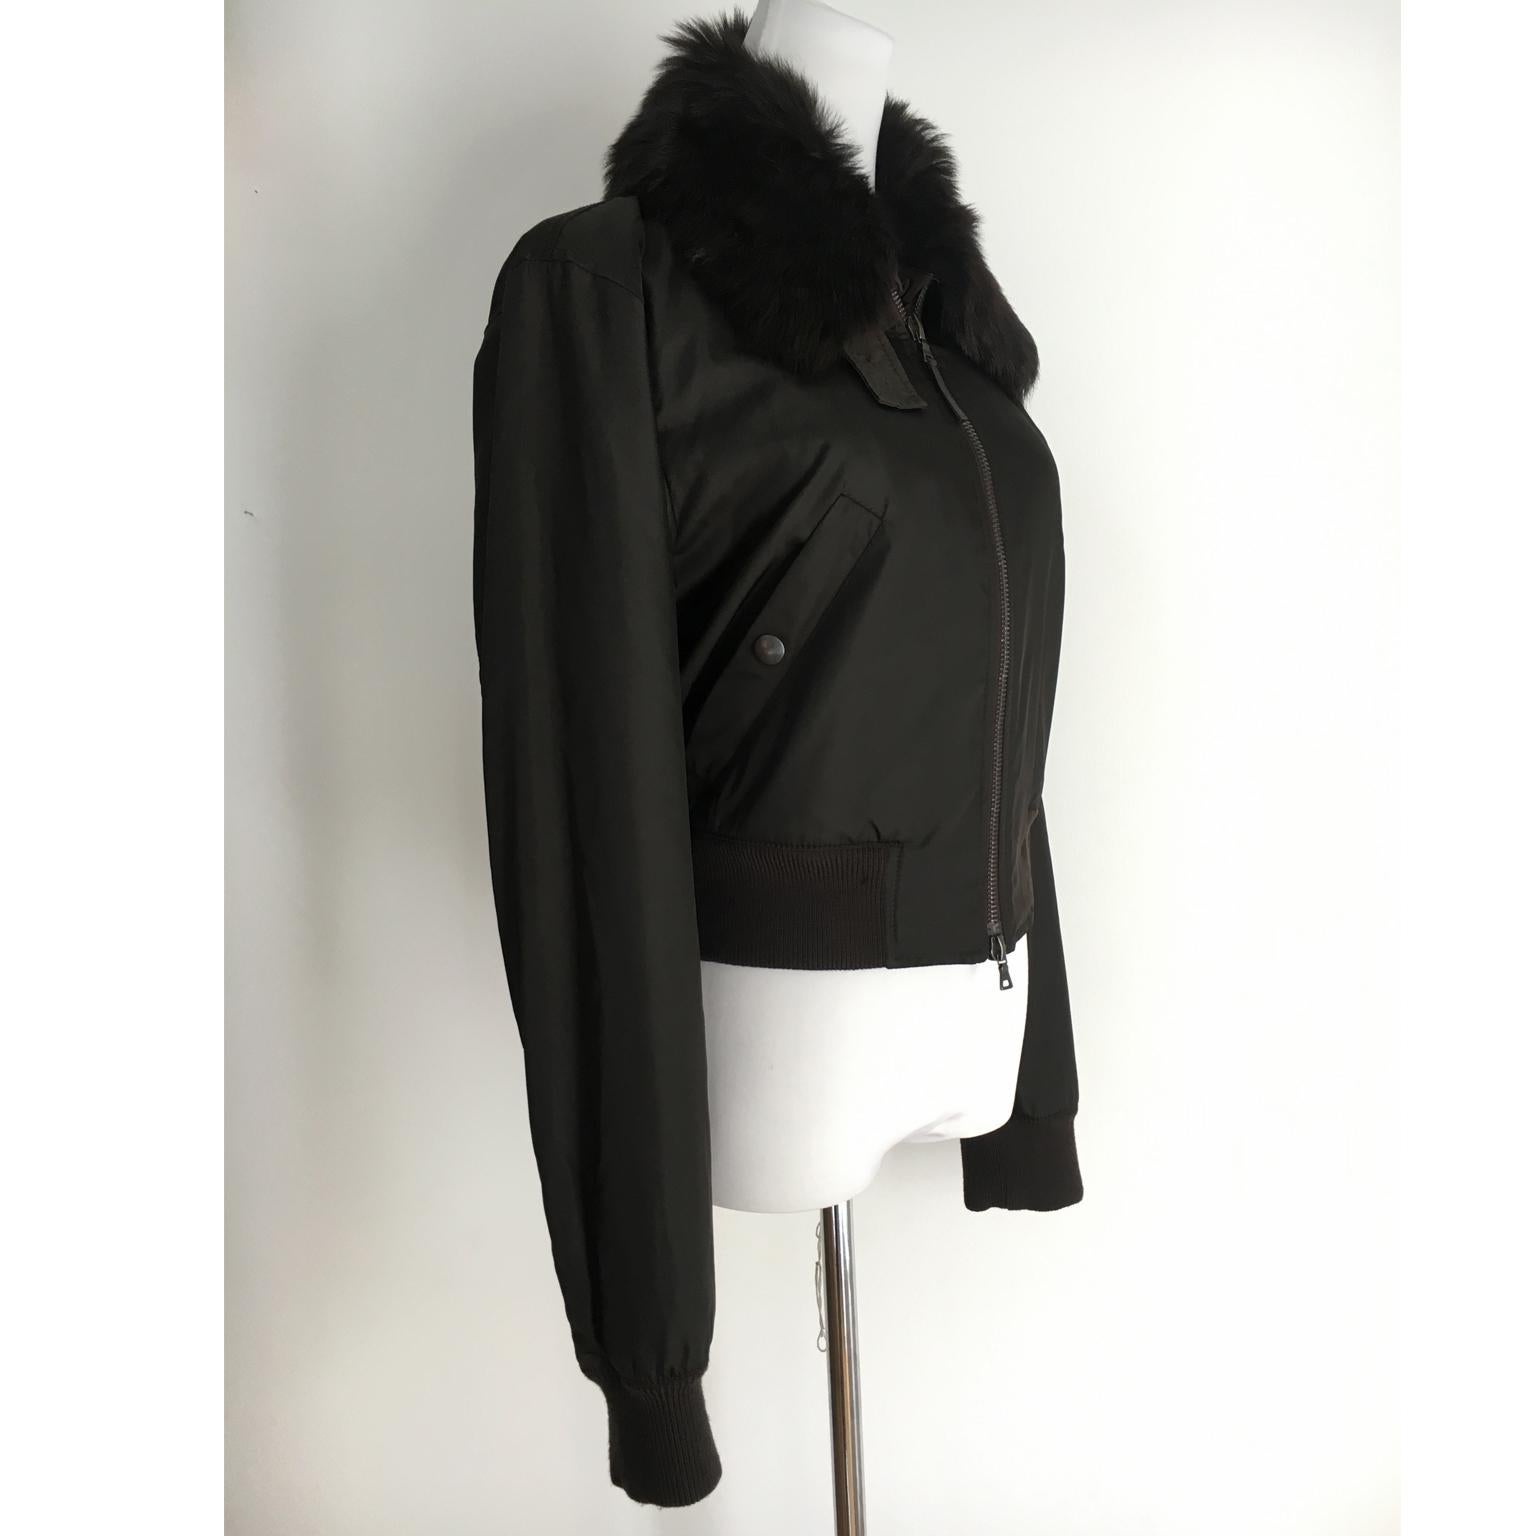 Prada dark chocolate brown cropped bomber jacket from circa 1990's.
Featuring removable fur collar, front 2 ways zip fastening, two front welt pockets and long sleeves. Original size : 46 (IT)     It fits like 36 EU, 4-6 US.
Measurements : 
Length :